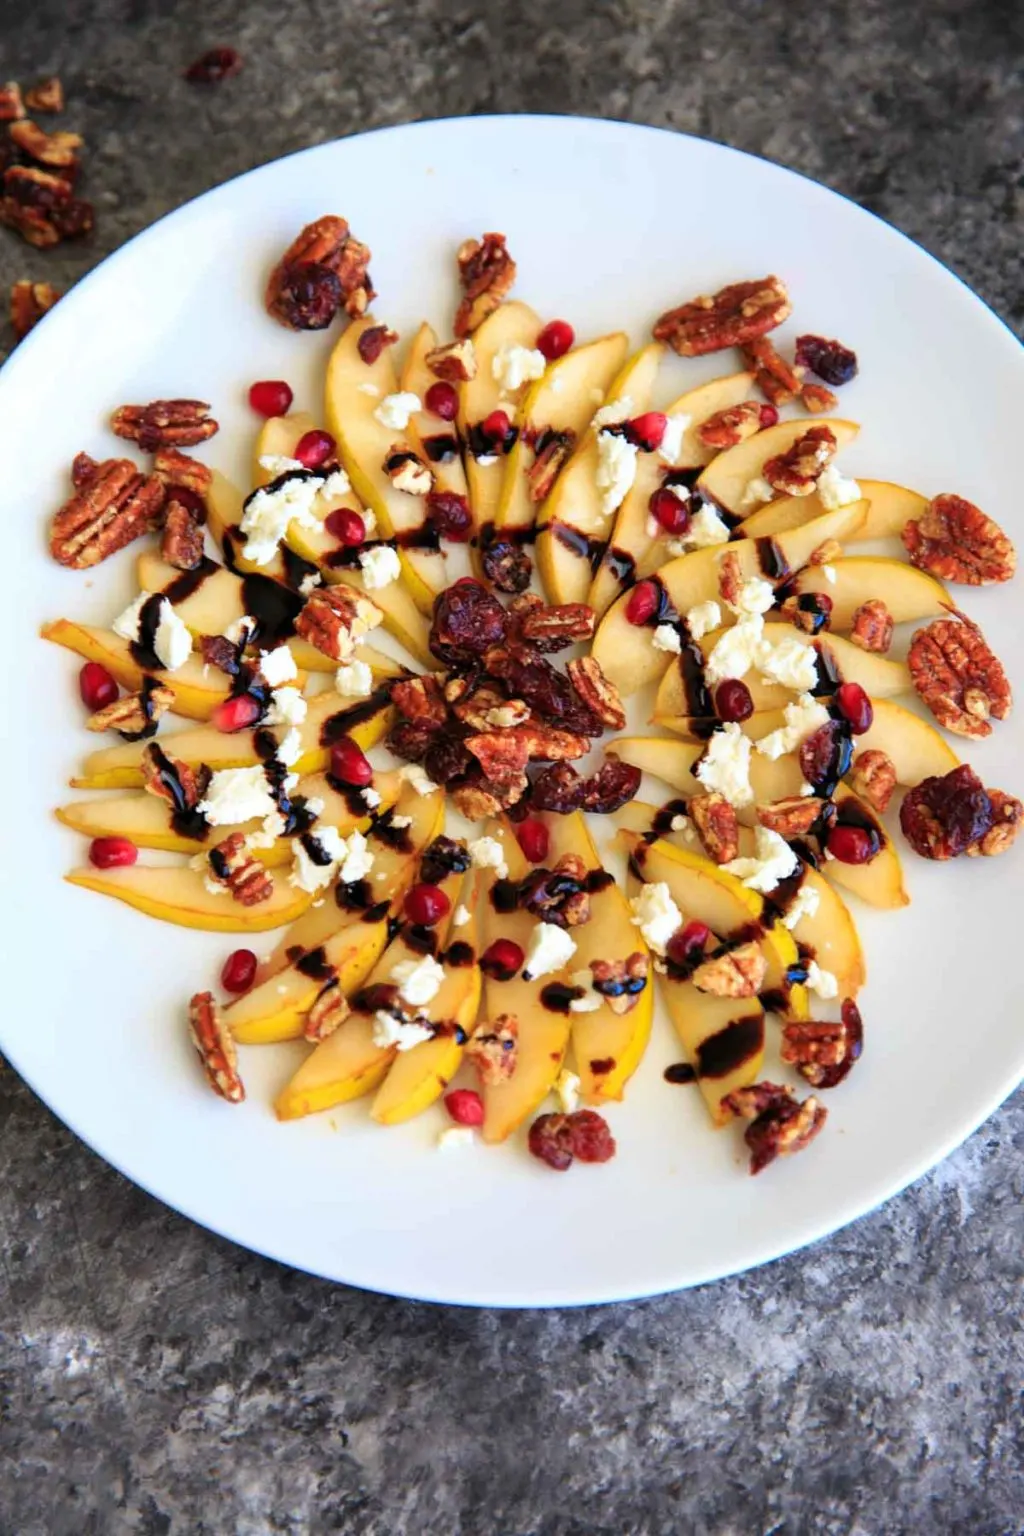 Sweet and savory pear nachos with glazes pecans, chevre cheese, pomegranate seeds and balsamic. A unique snack or dessert!